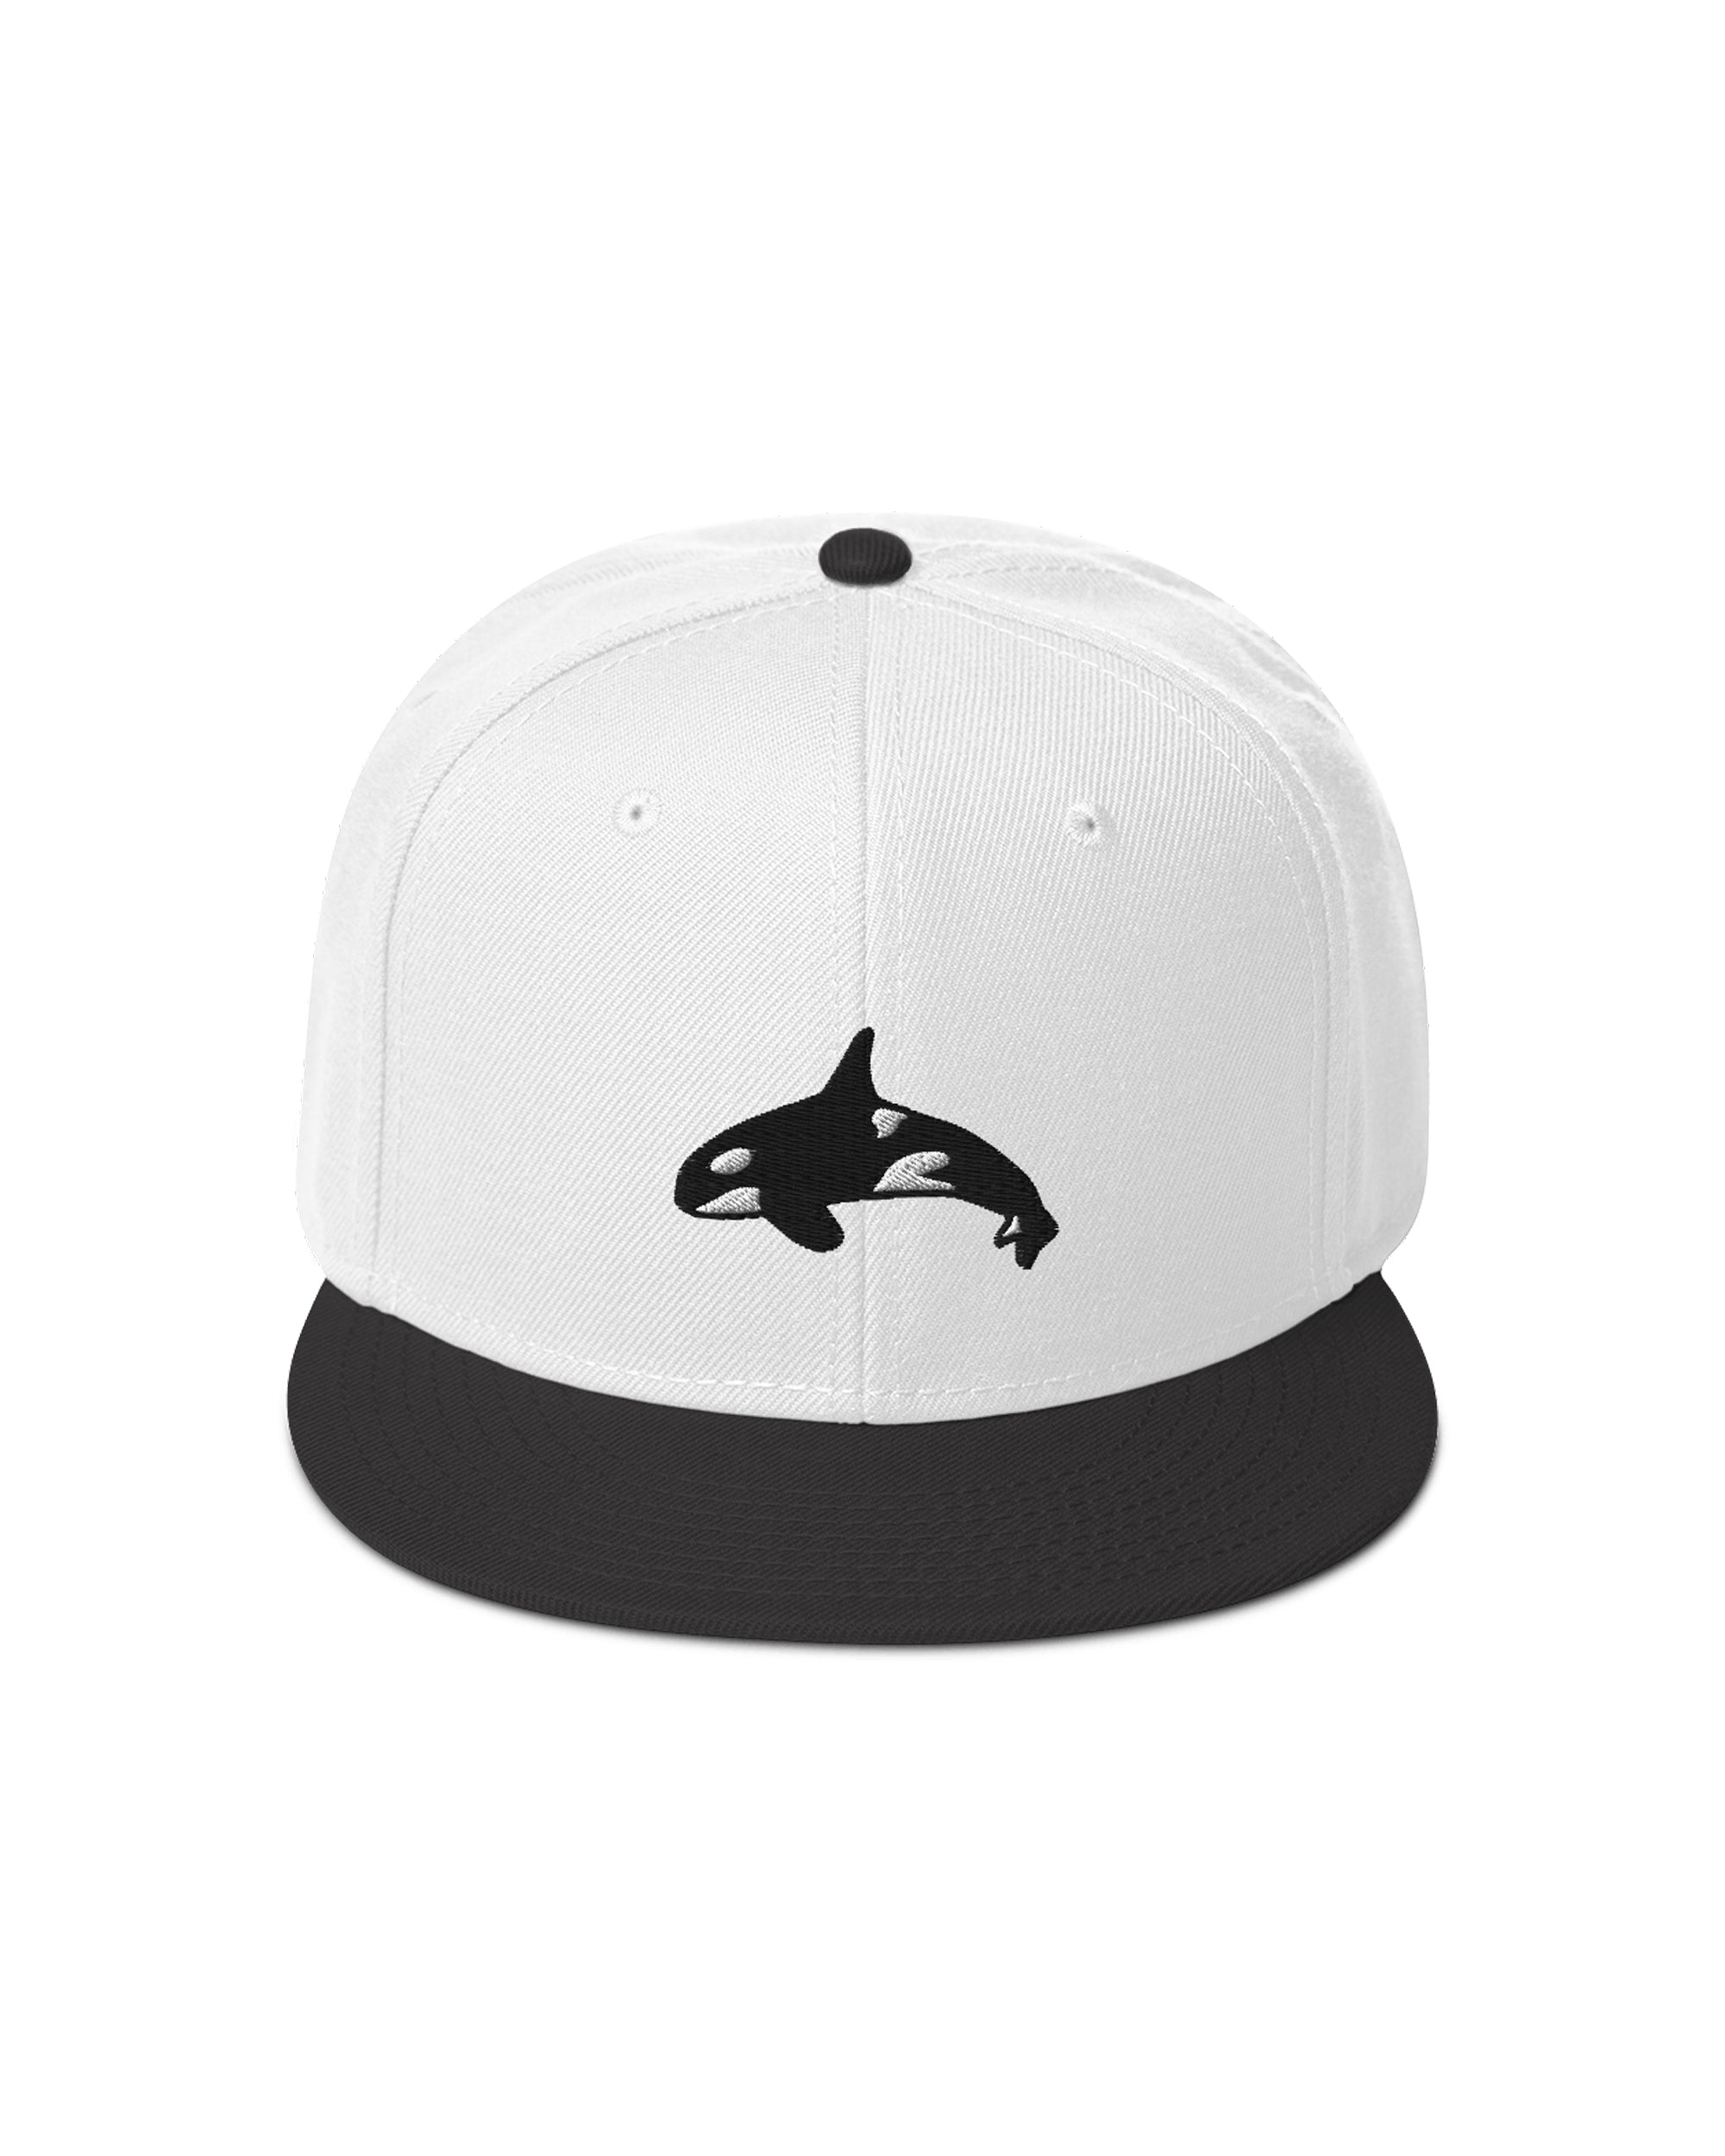 Orca Snapback Hat – All Everything Dolphin